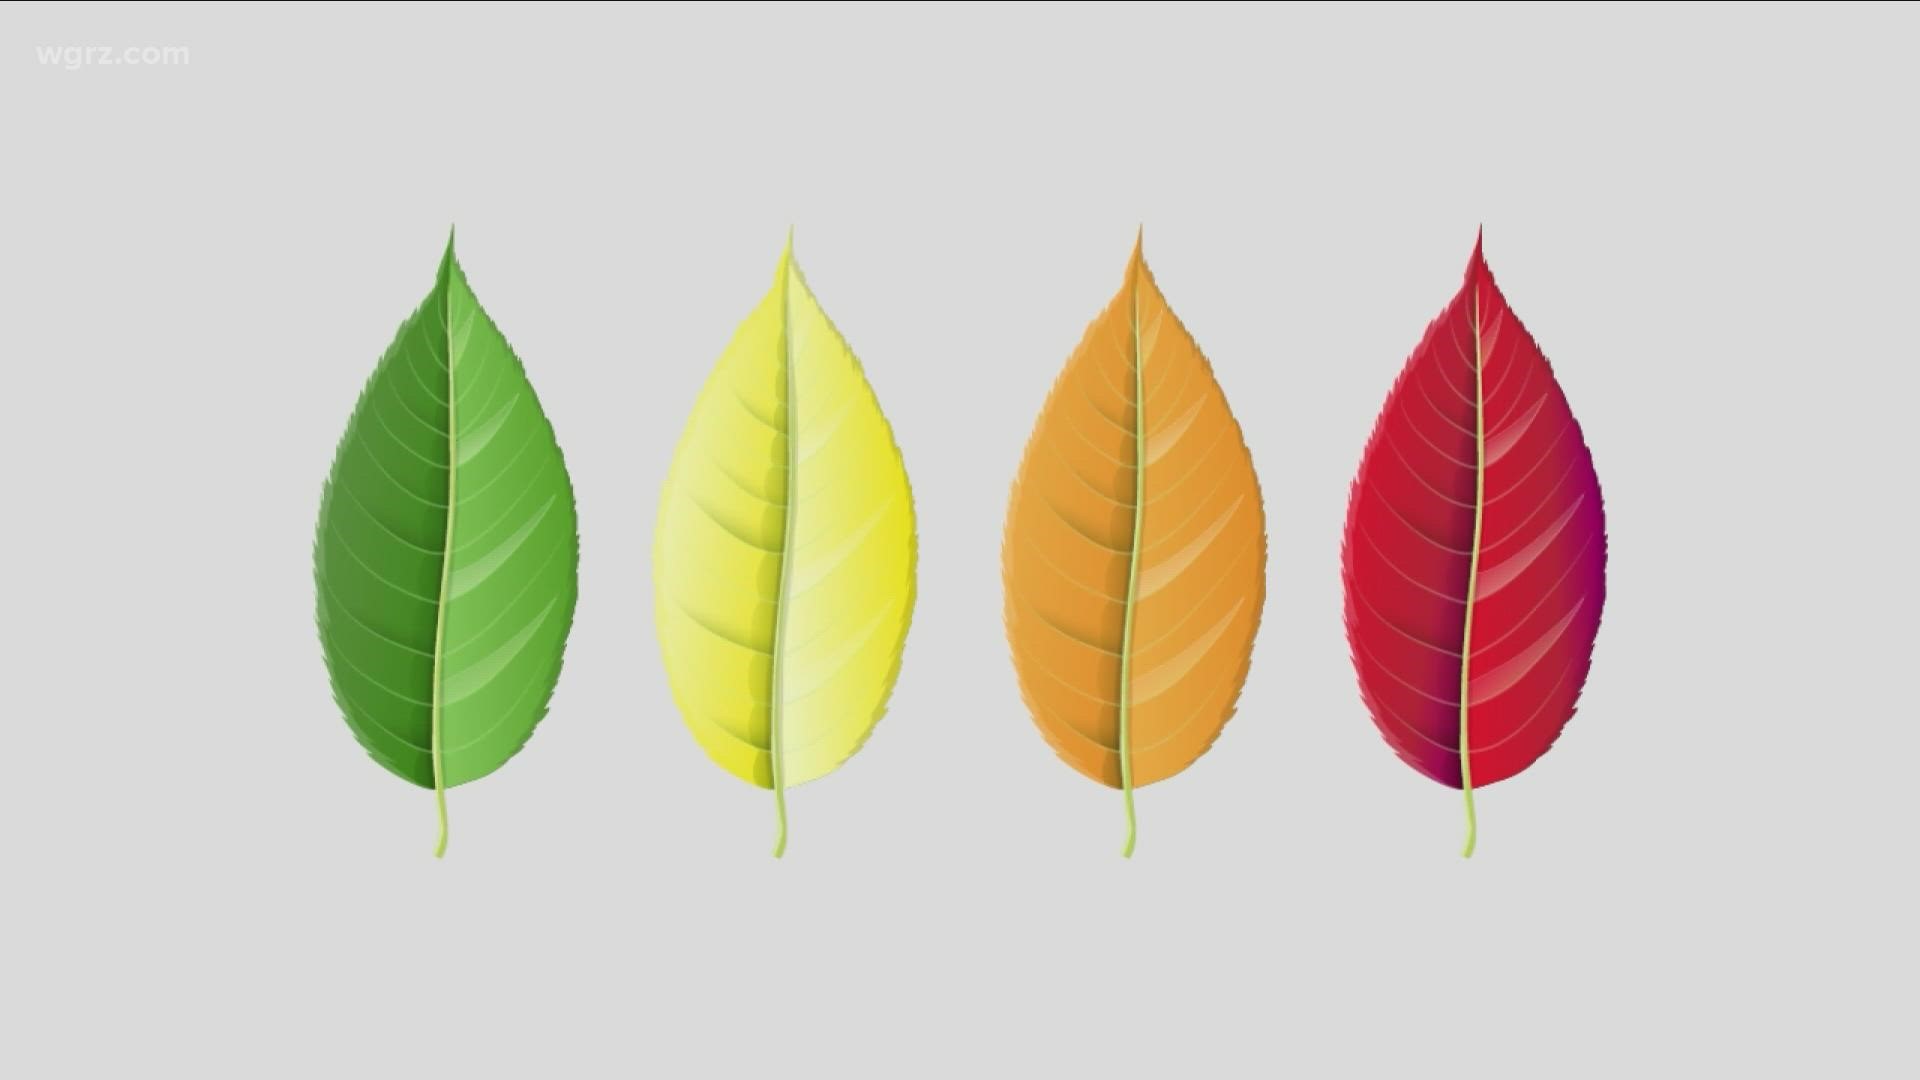 Leaves are beginning their seasonal color change, but how does that happen? Meteorologist Patrick Hammer explains.